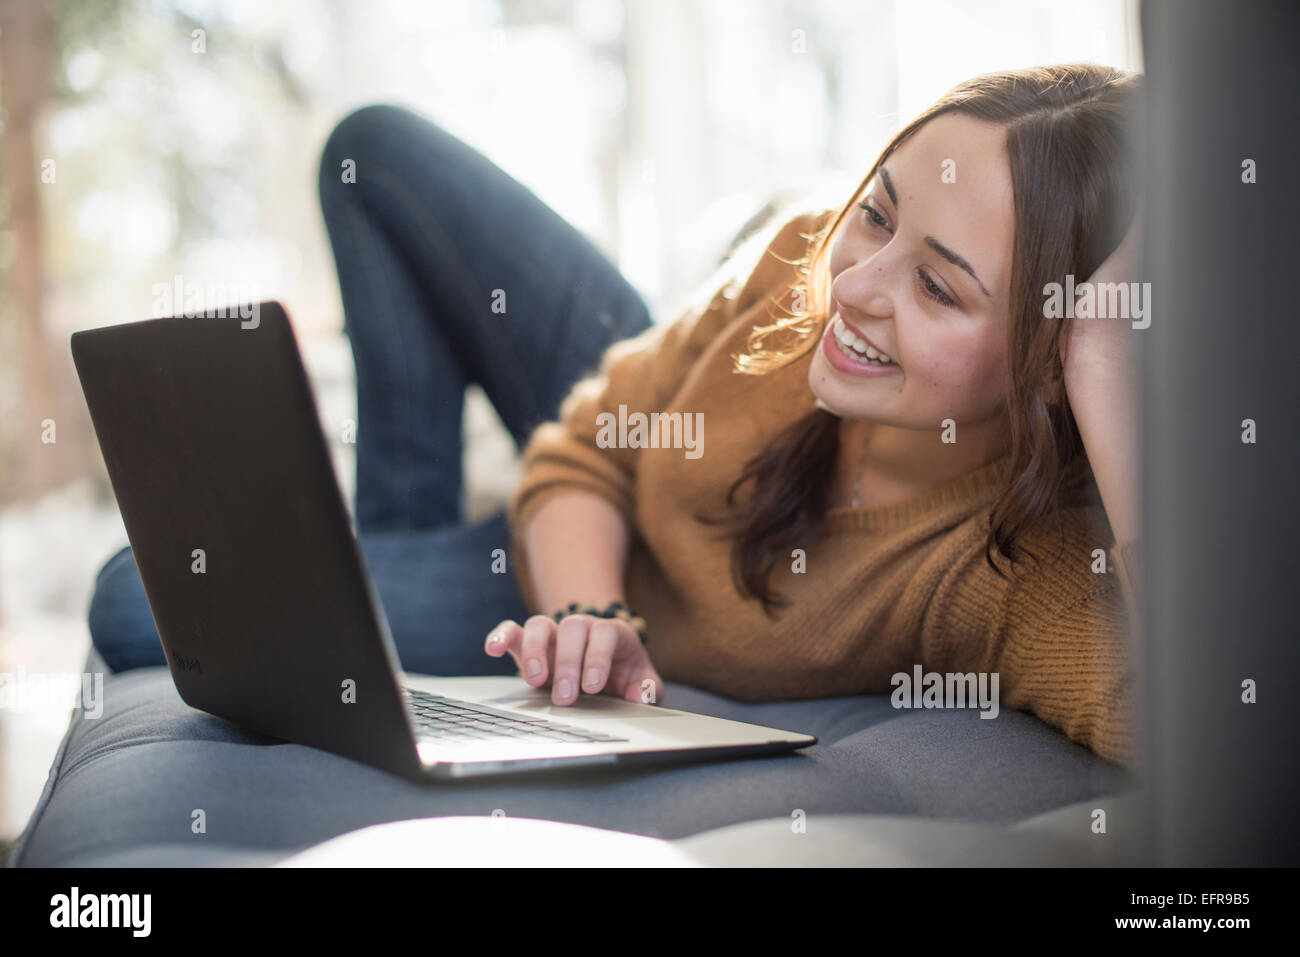 Woman lying on a sofa looking at her laptop, smiling. Stock Photo